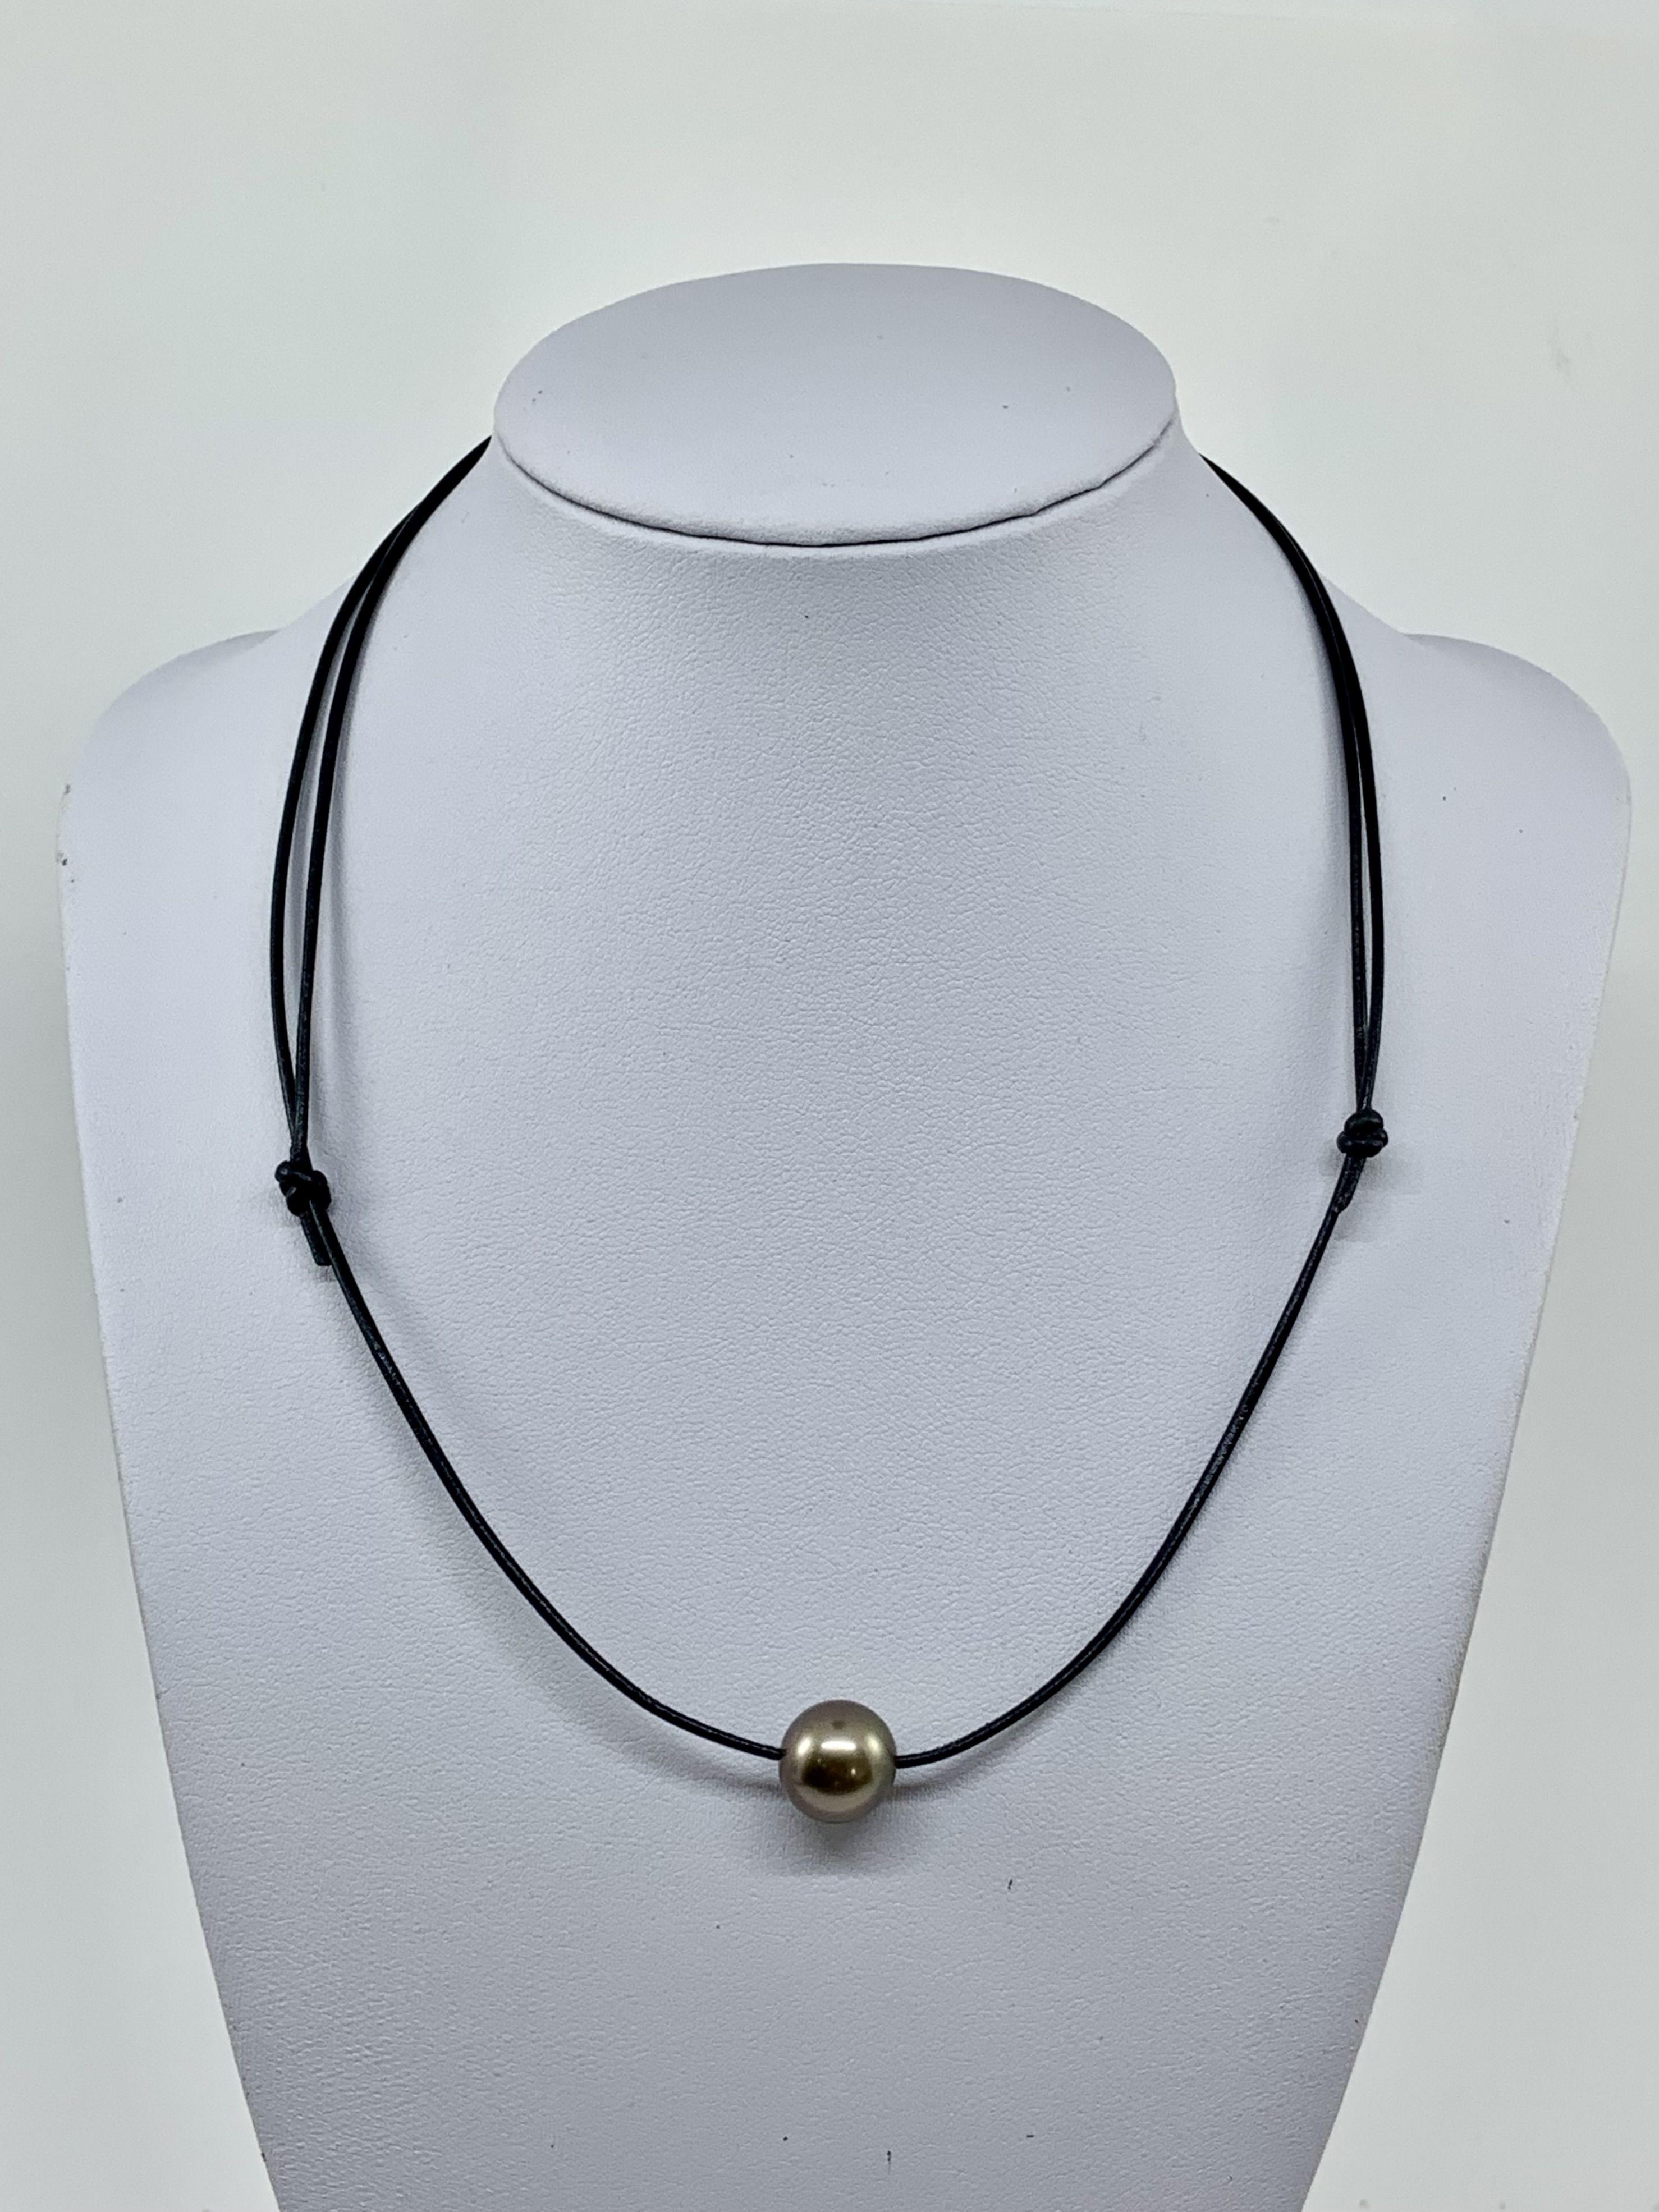 Simply Beautiful! Tahitian Pearl on Leather Cord Necklace. Hand set with an 11.1mm Pearl on a Hand-crafted Leather Cord of 1.6mm thickness. The necklace measures approx. 18” long. More Beautiful in real time! Classic and Chic...A piece you’ll turn